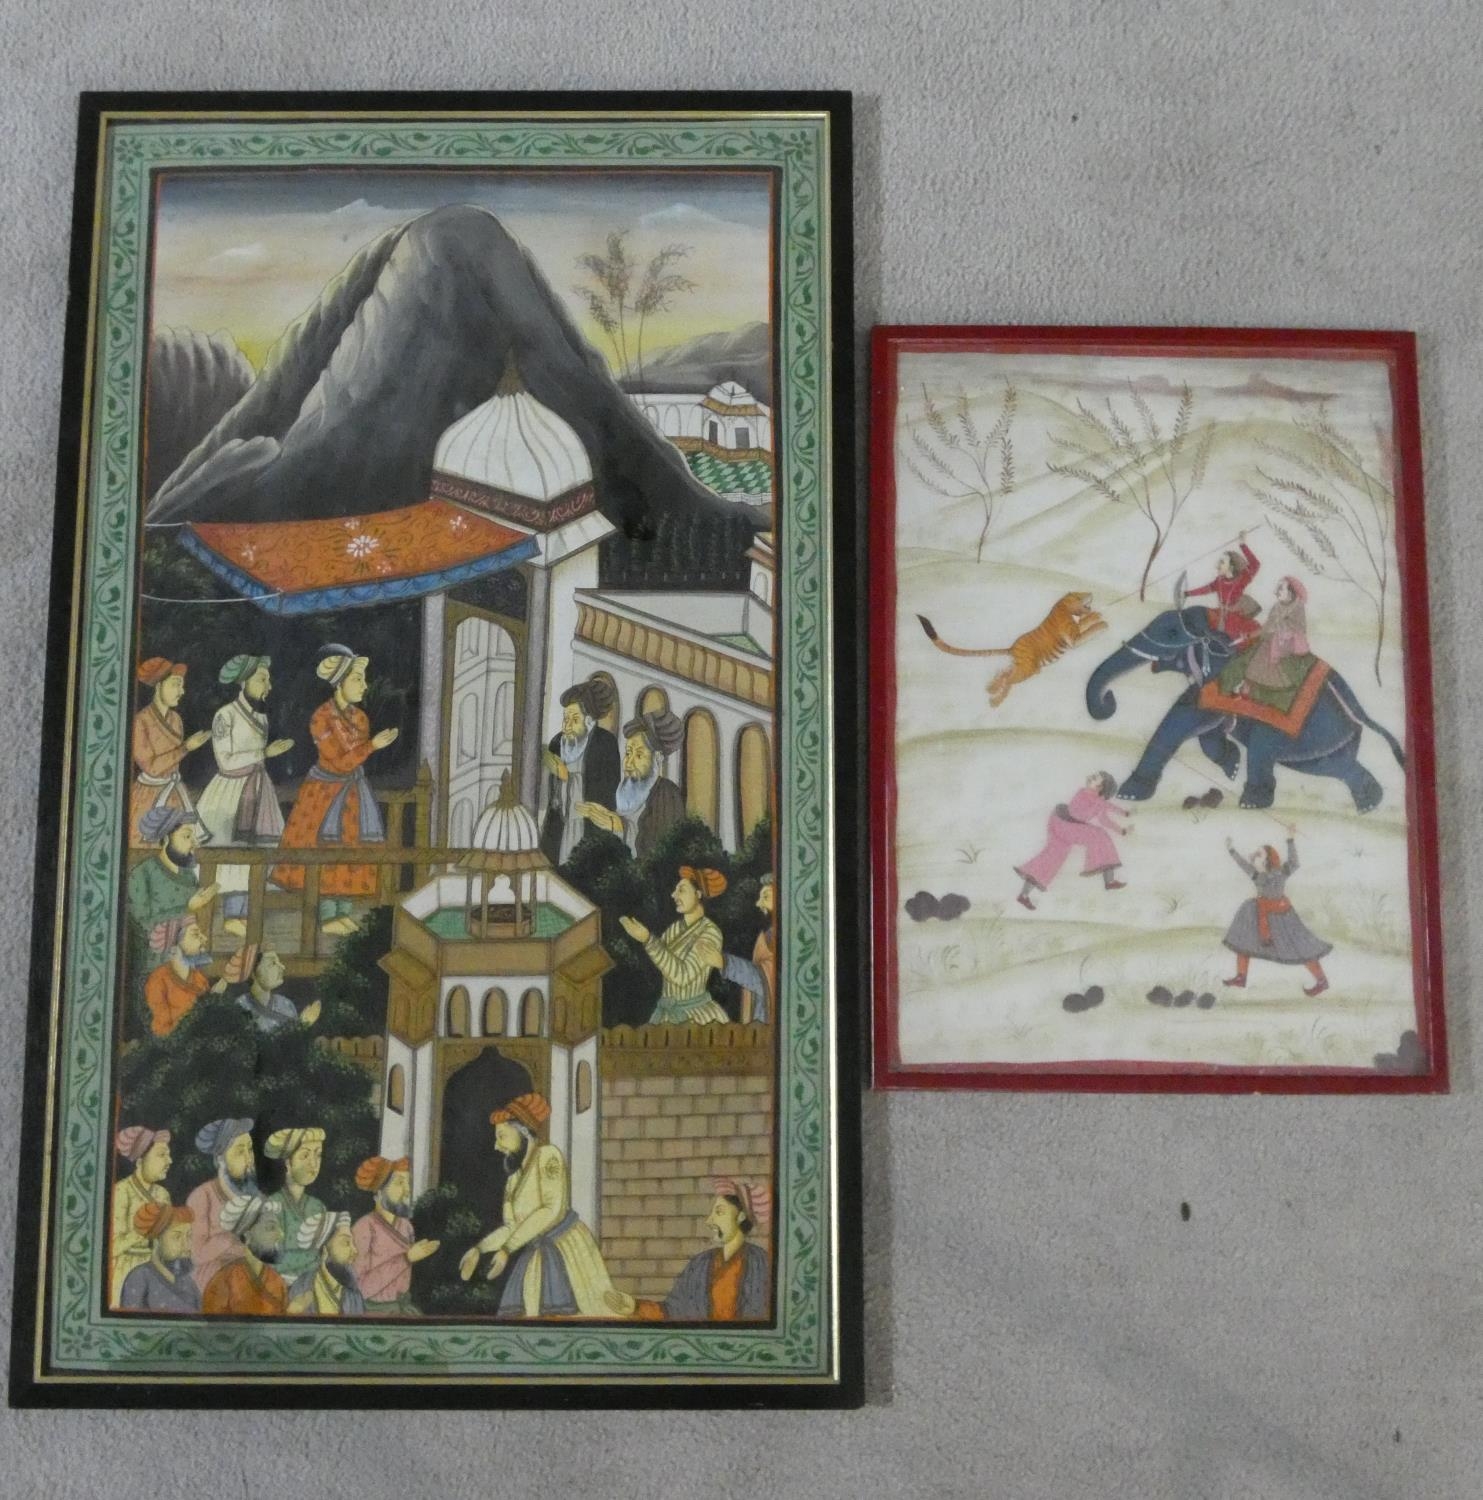 Two framed and glazed Indo-Persian silk paintings. One of a hunt on elephant back with wild